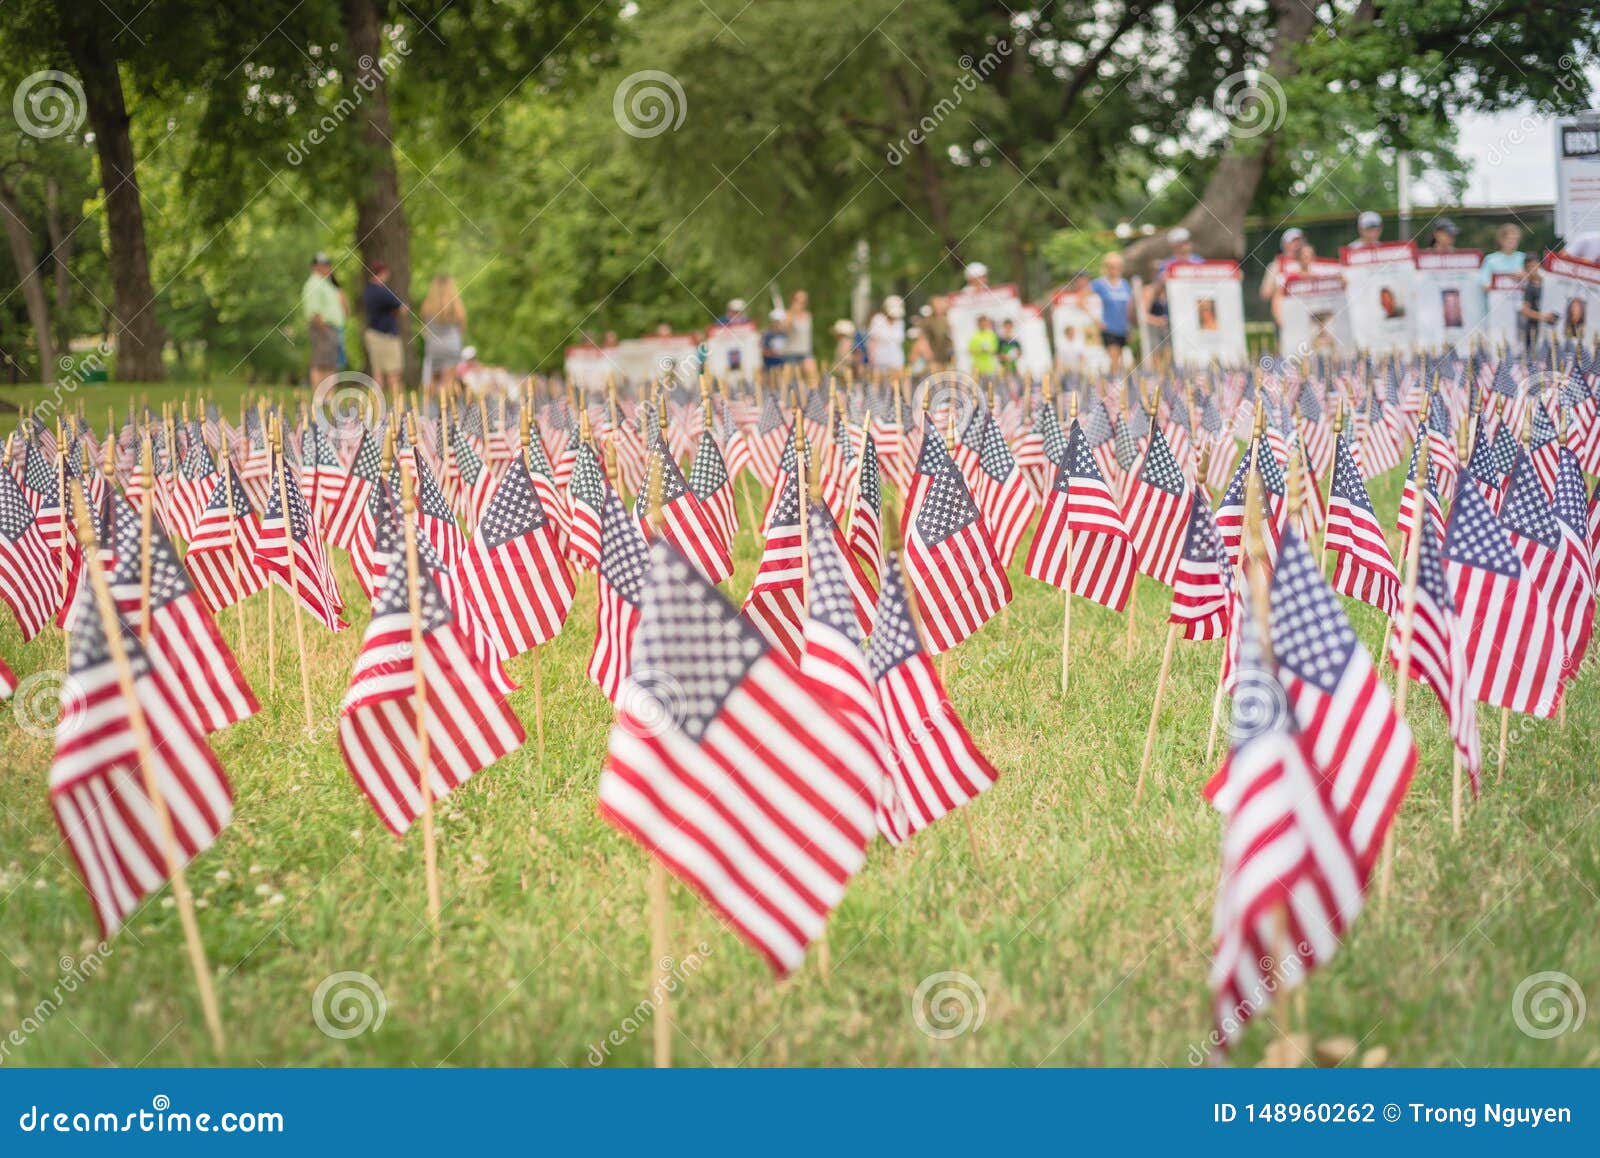 Lawn American Flags With Blurry Row Of People Carry Fallen Soldiers